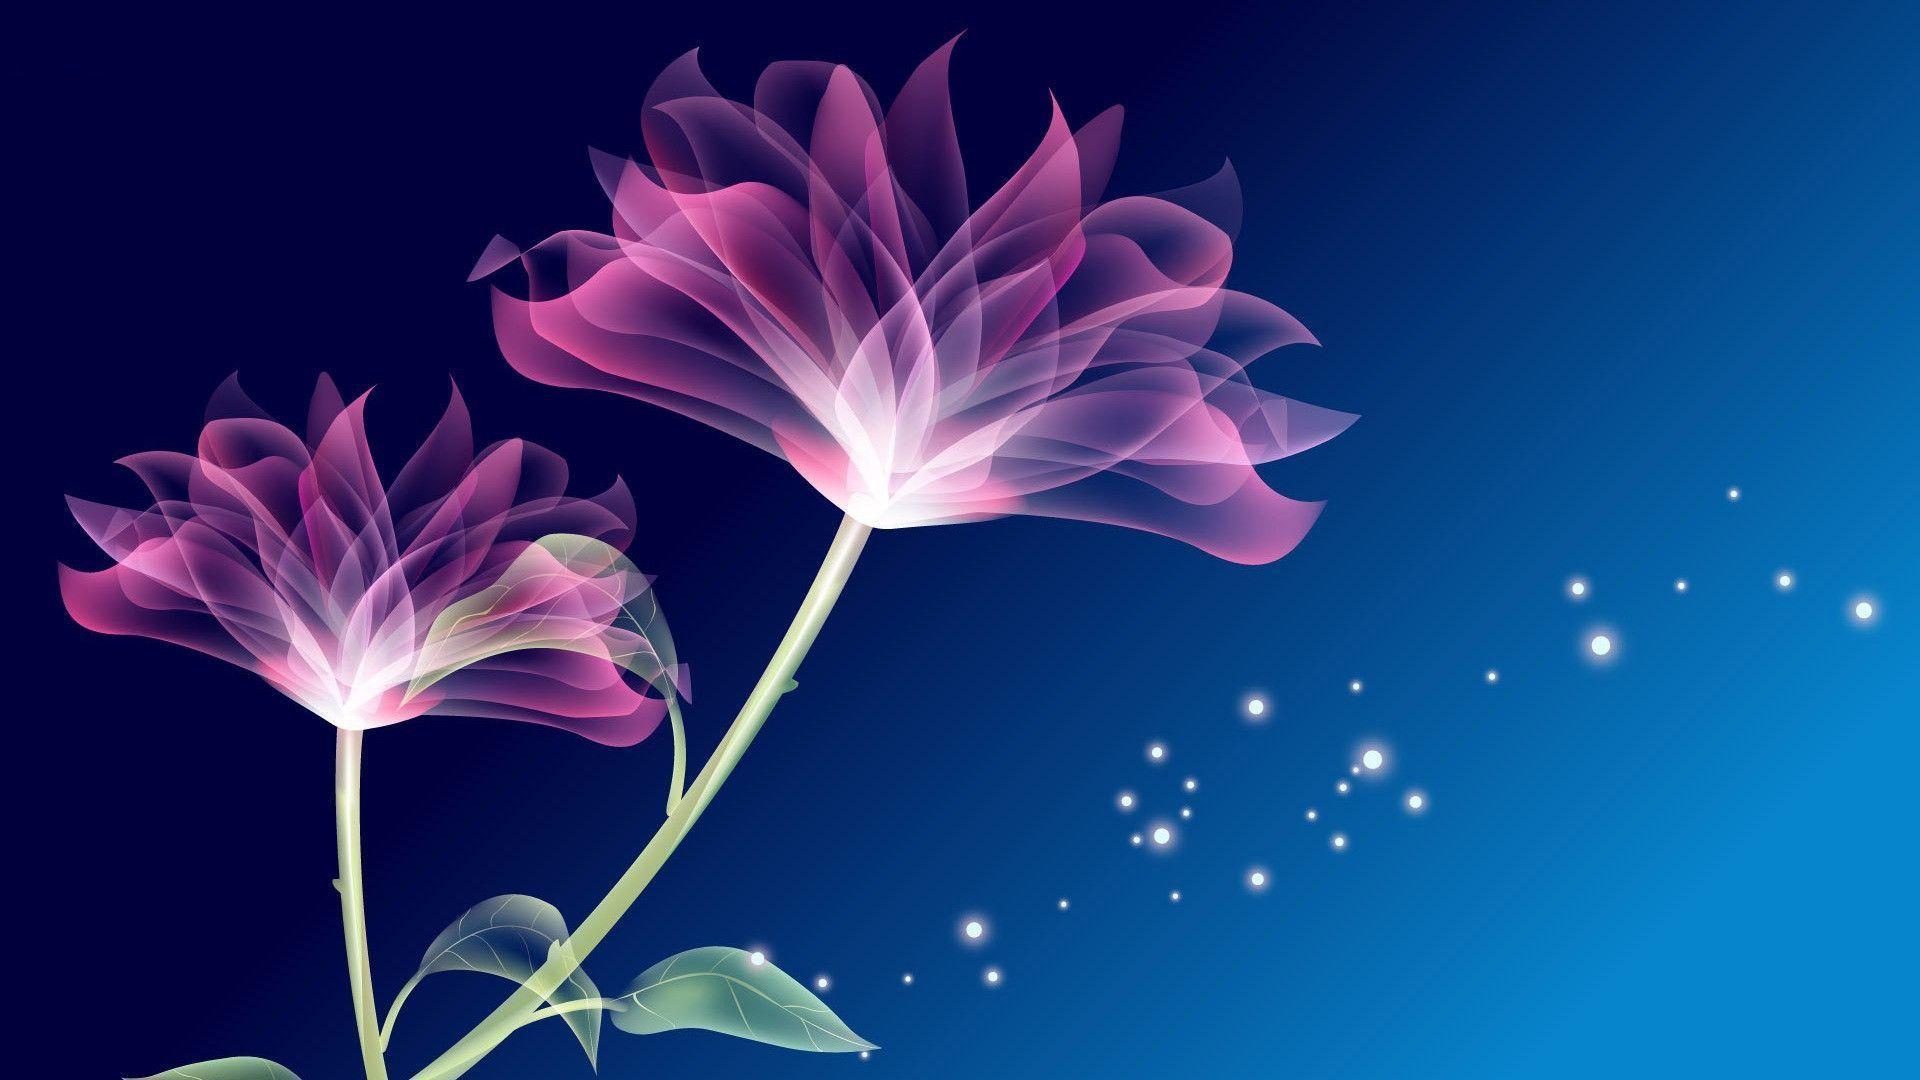 Beautiful Flowers Blue Abstract Awesome iPhone Wallpaper HD